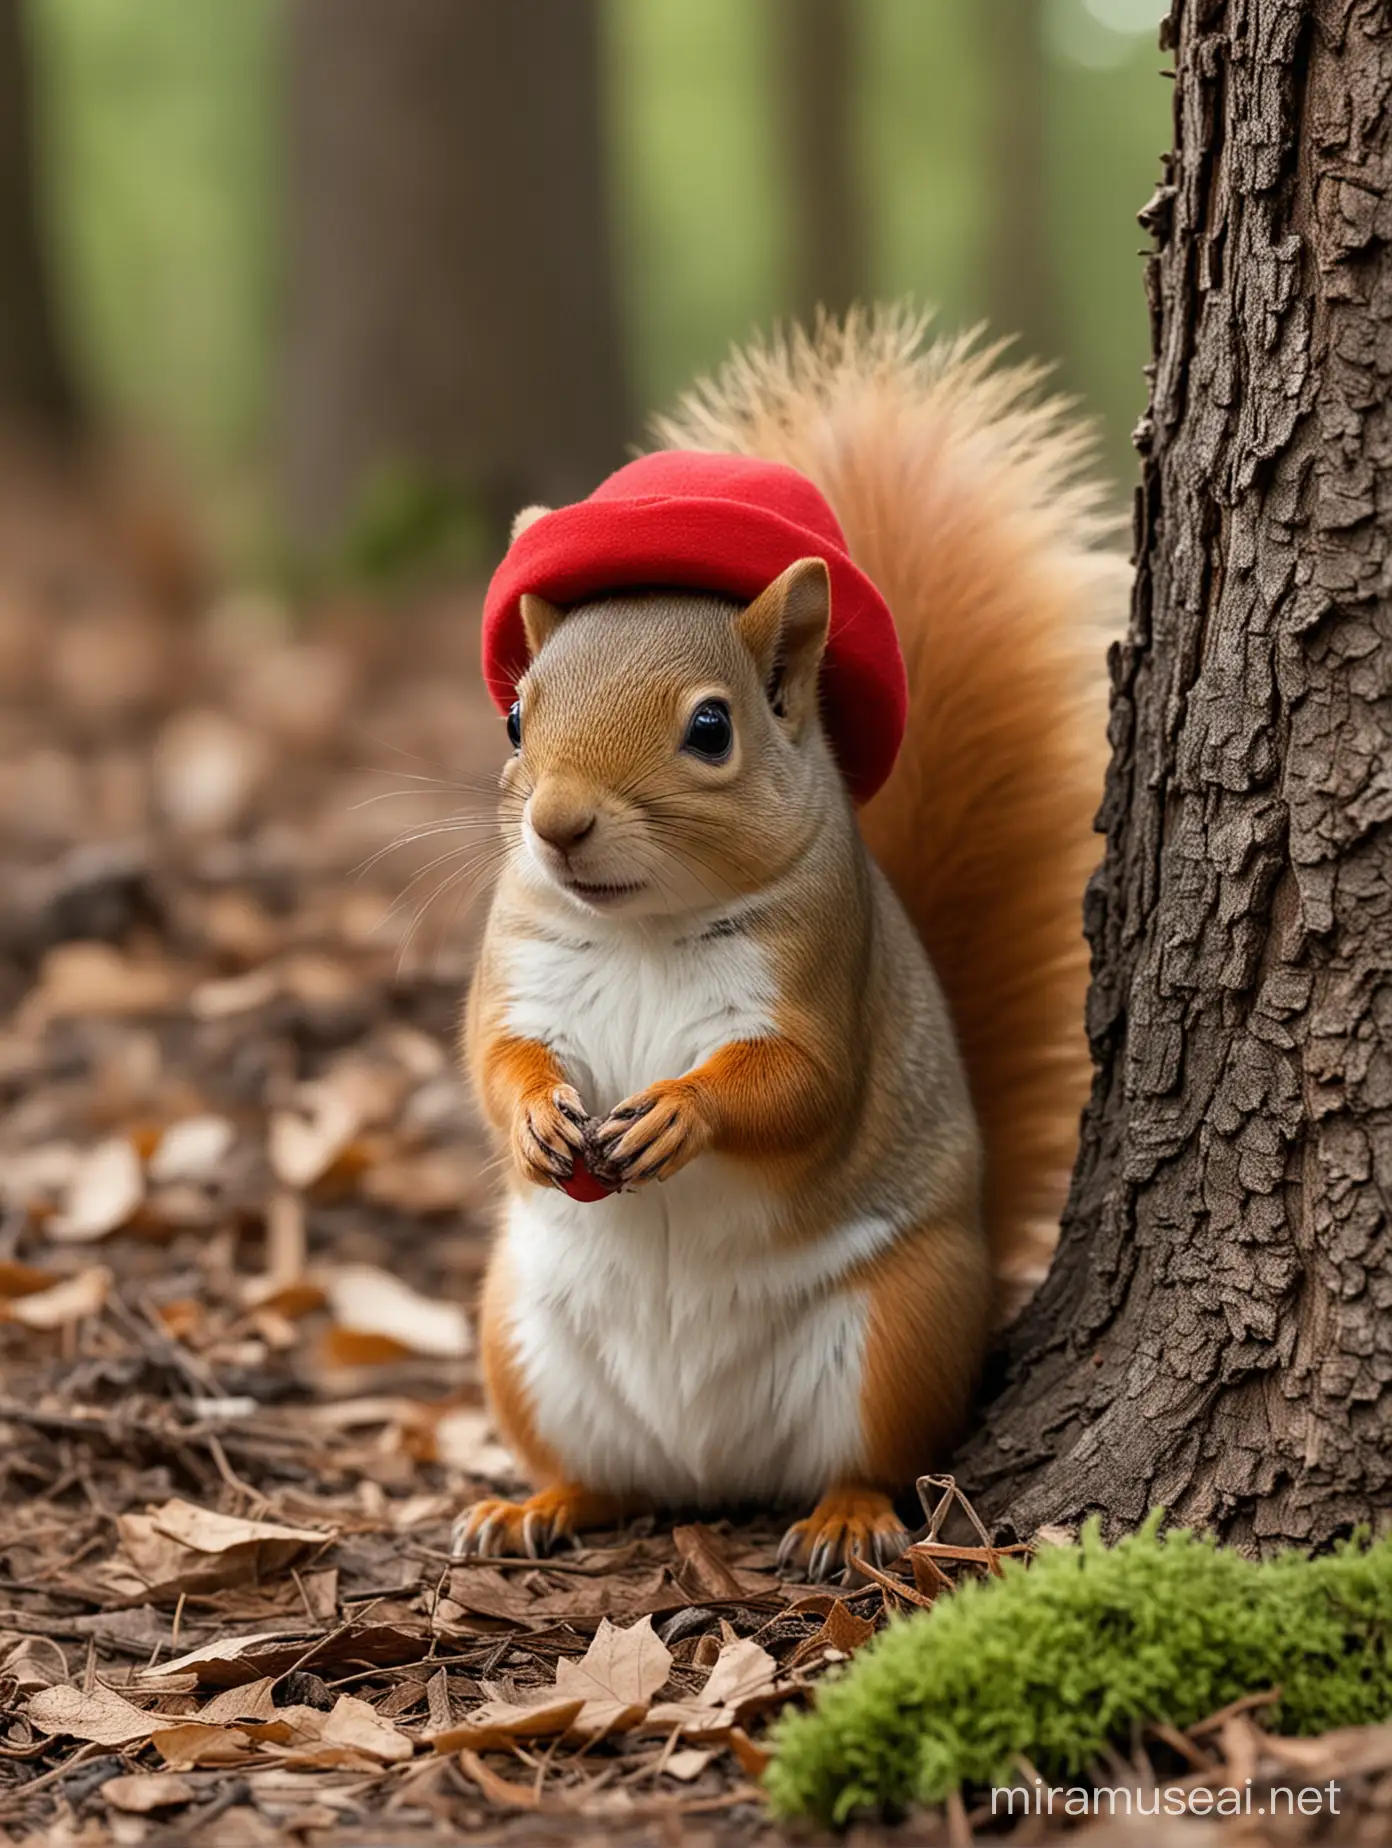 In the forest, there lives a  lovely little squirrel. It always wears a small red hat.